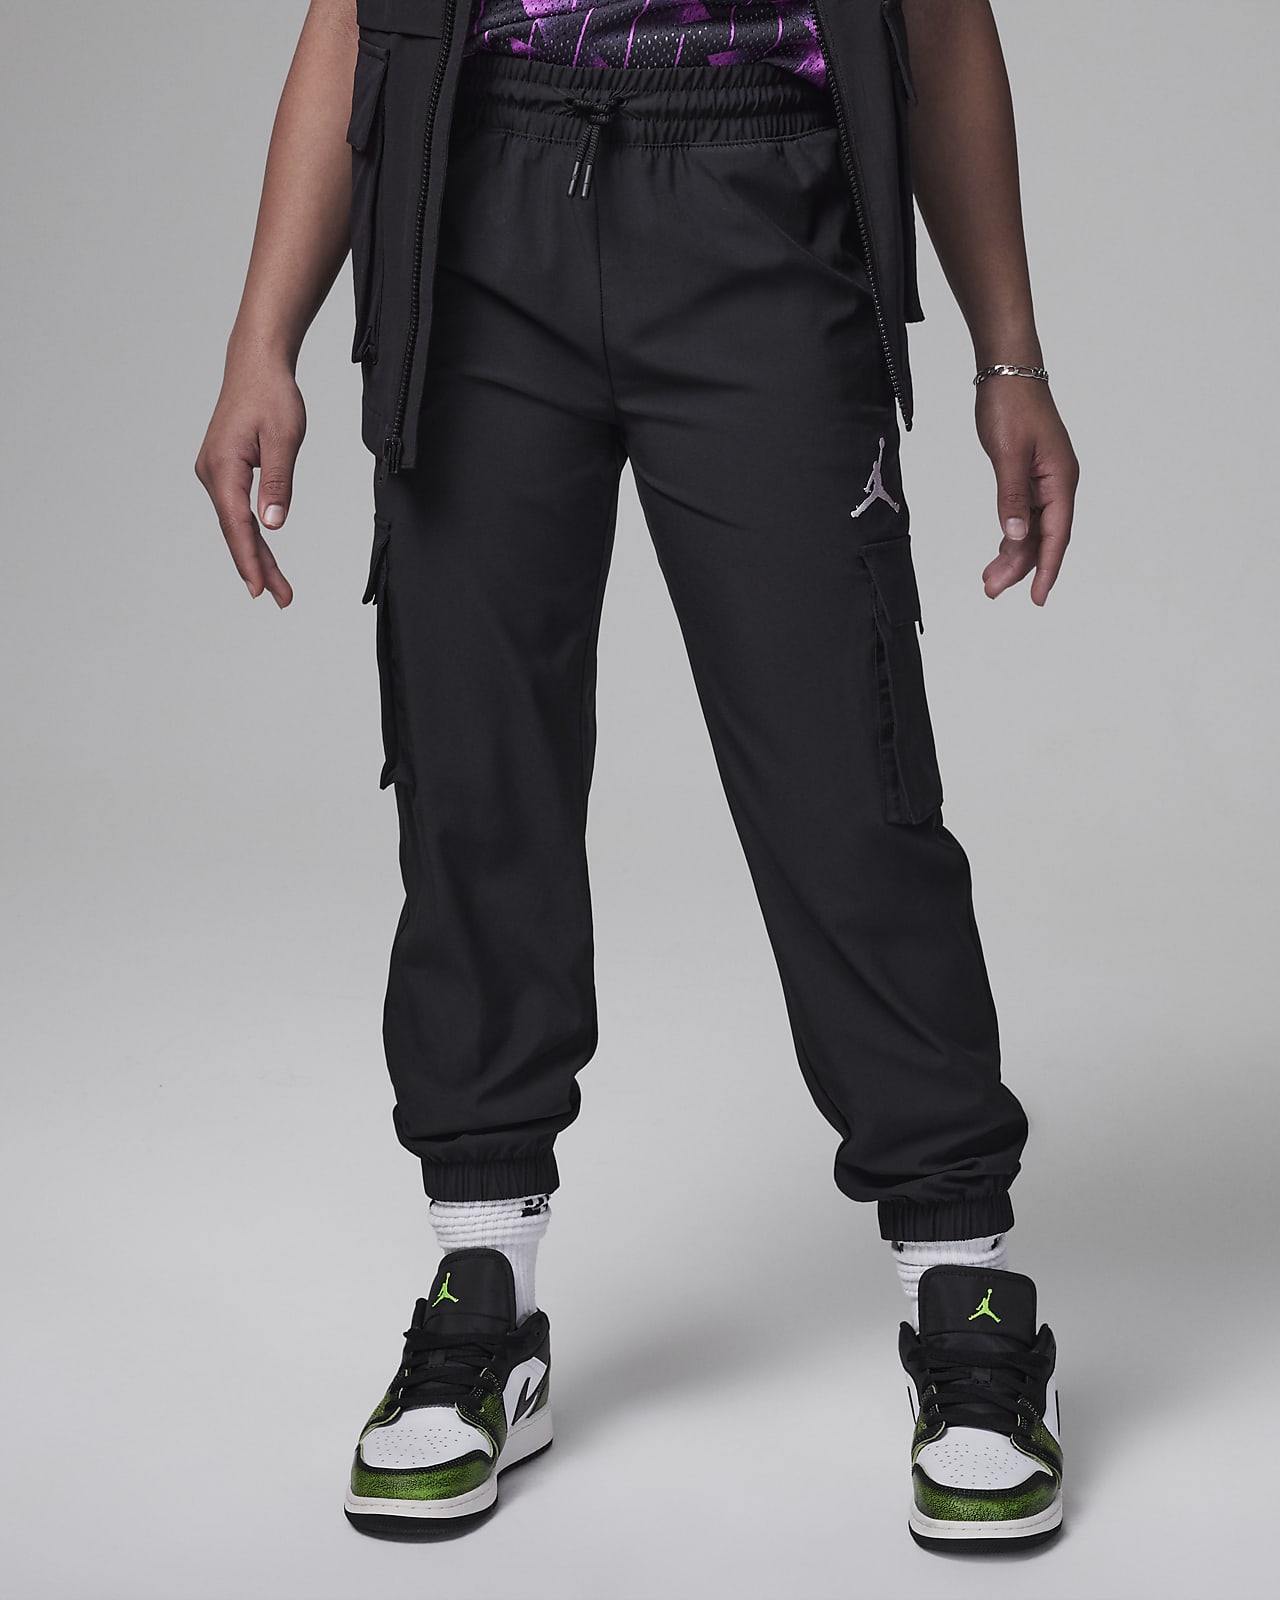 Introducing the Women's Big Pocket Straight Cargo Pants from INTO HYPEZONE!  These pants are a must-have for fashion-forward individuals w... | Instagram